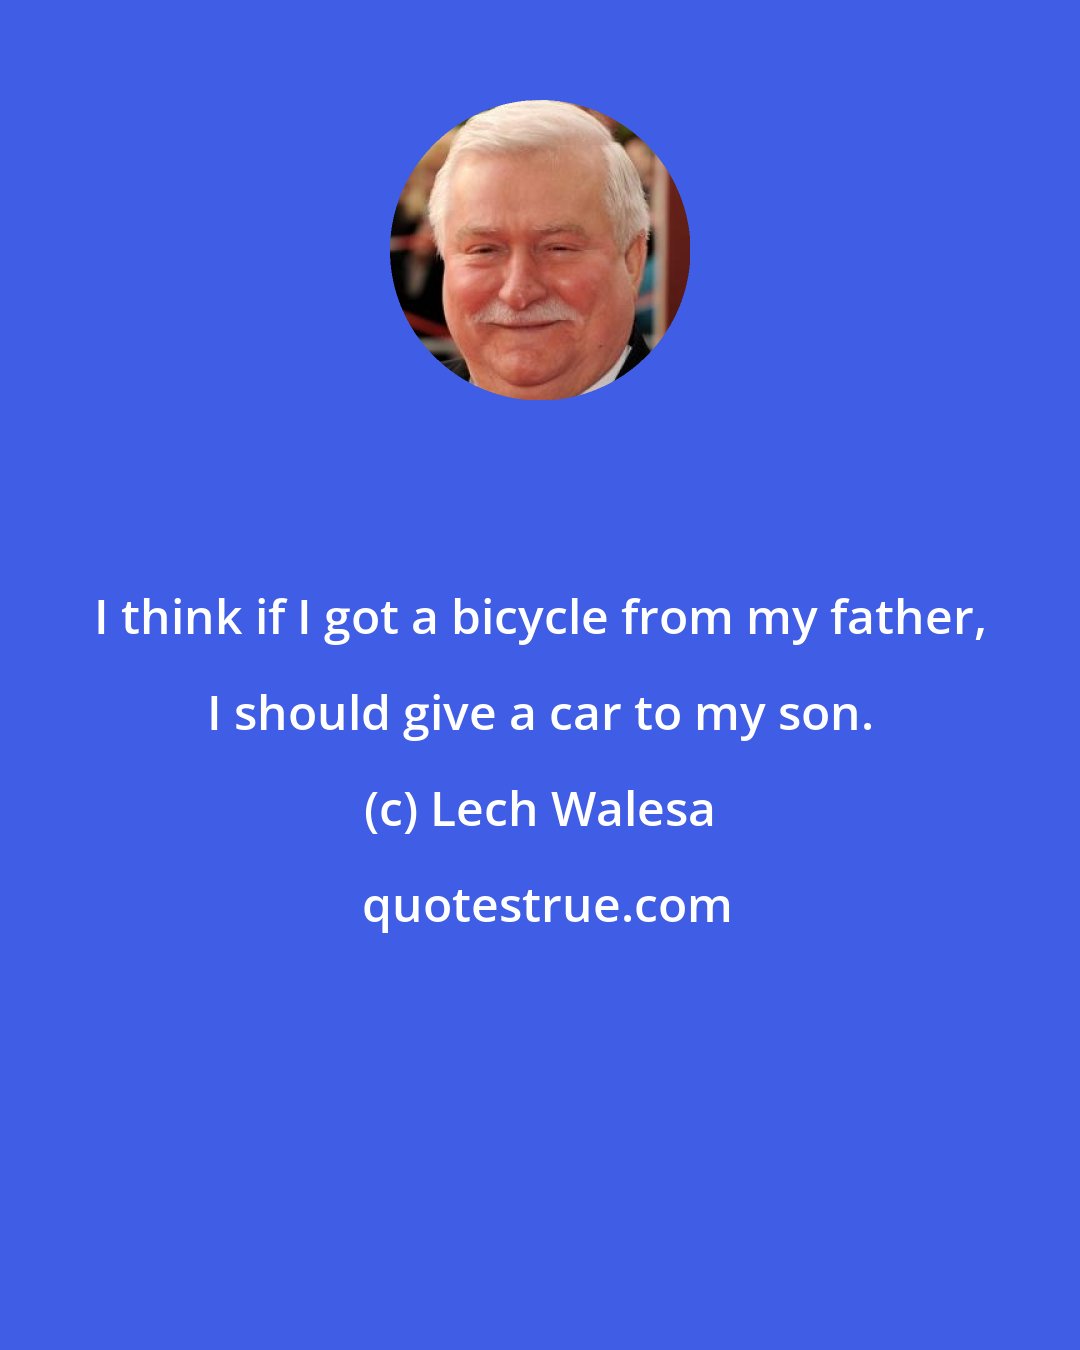 Lech Walesa: I think if I got a bicycle from my father, I should give a car to my son.